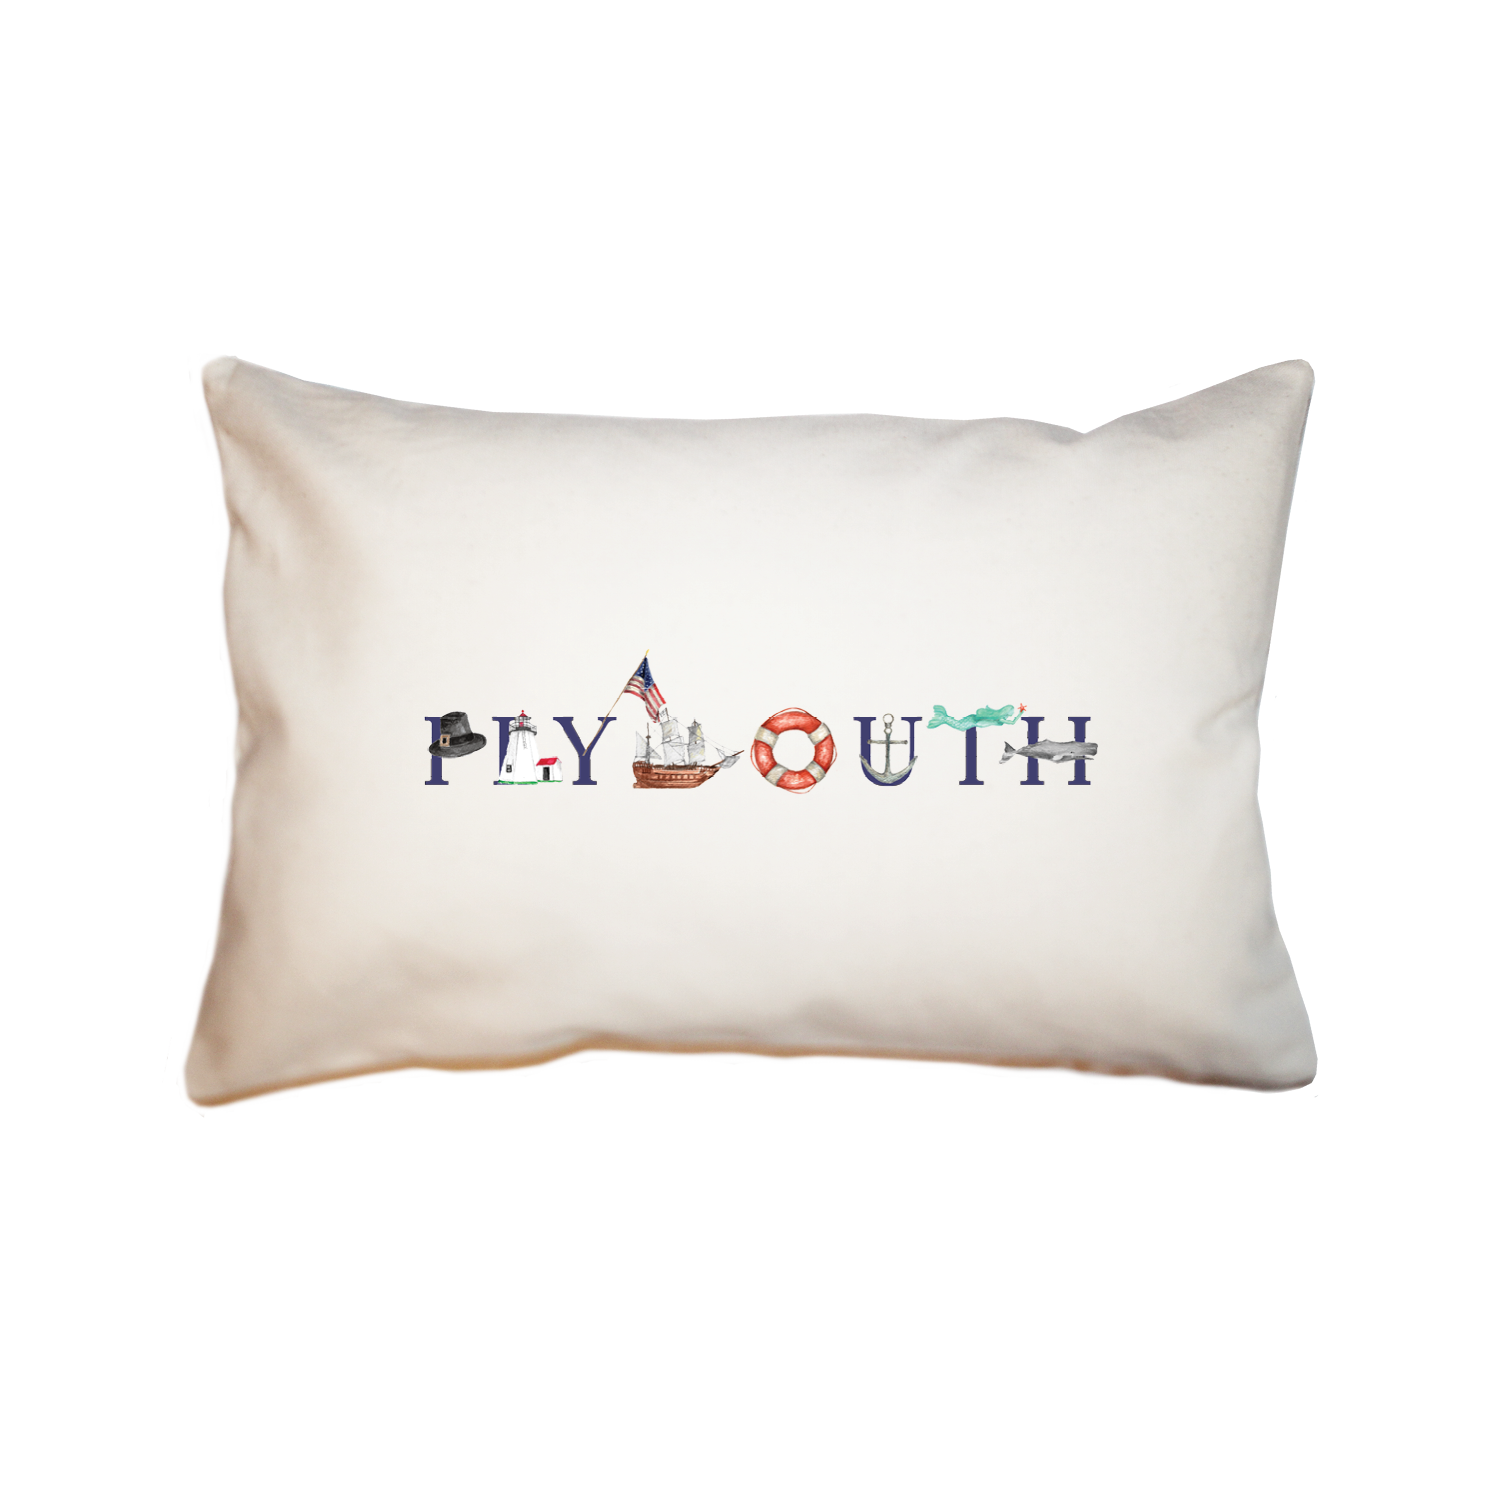 Plymouth large rectangle pillow